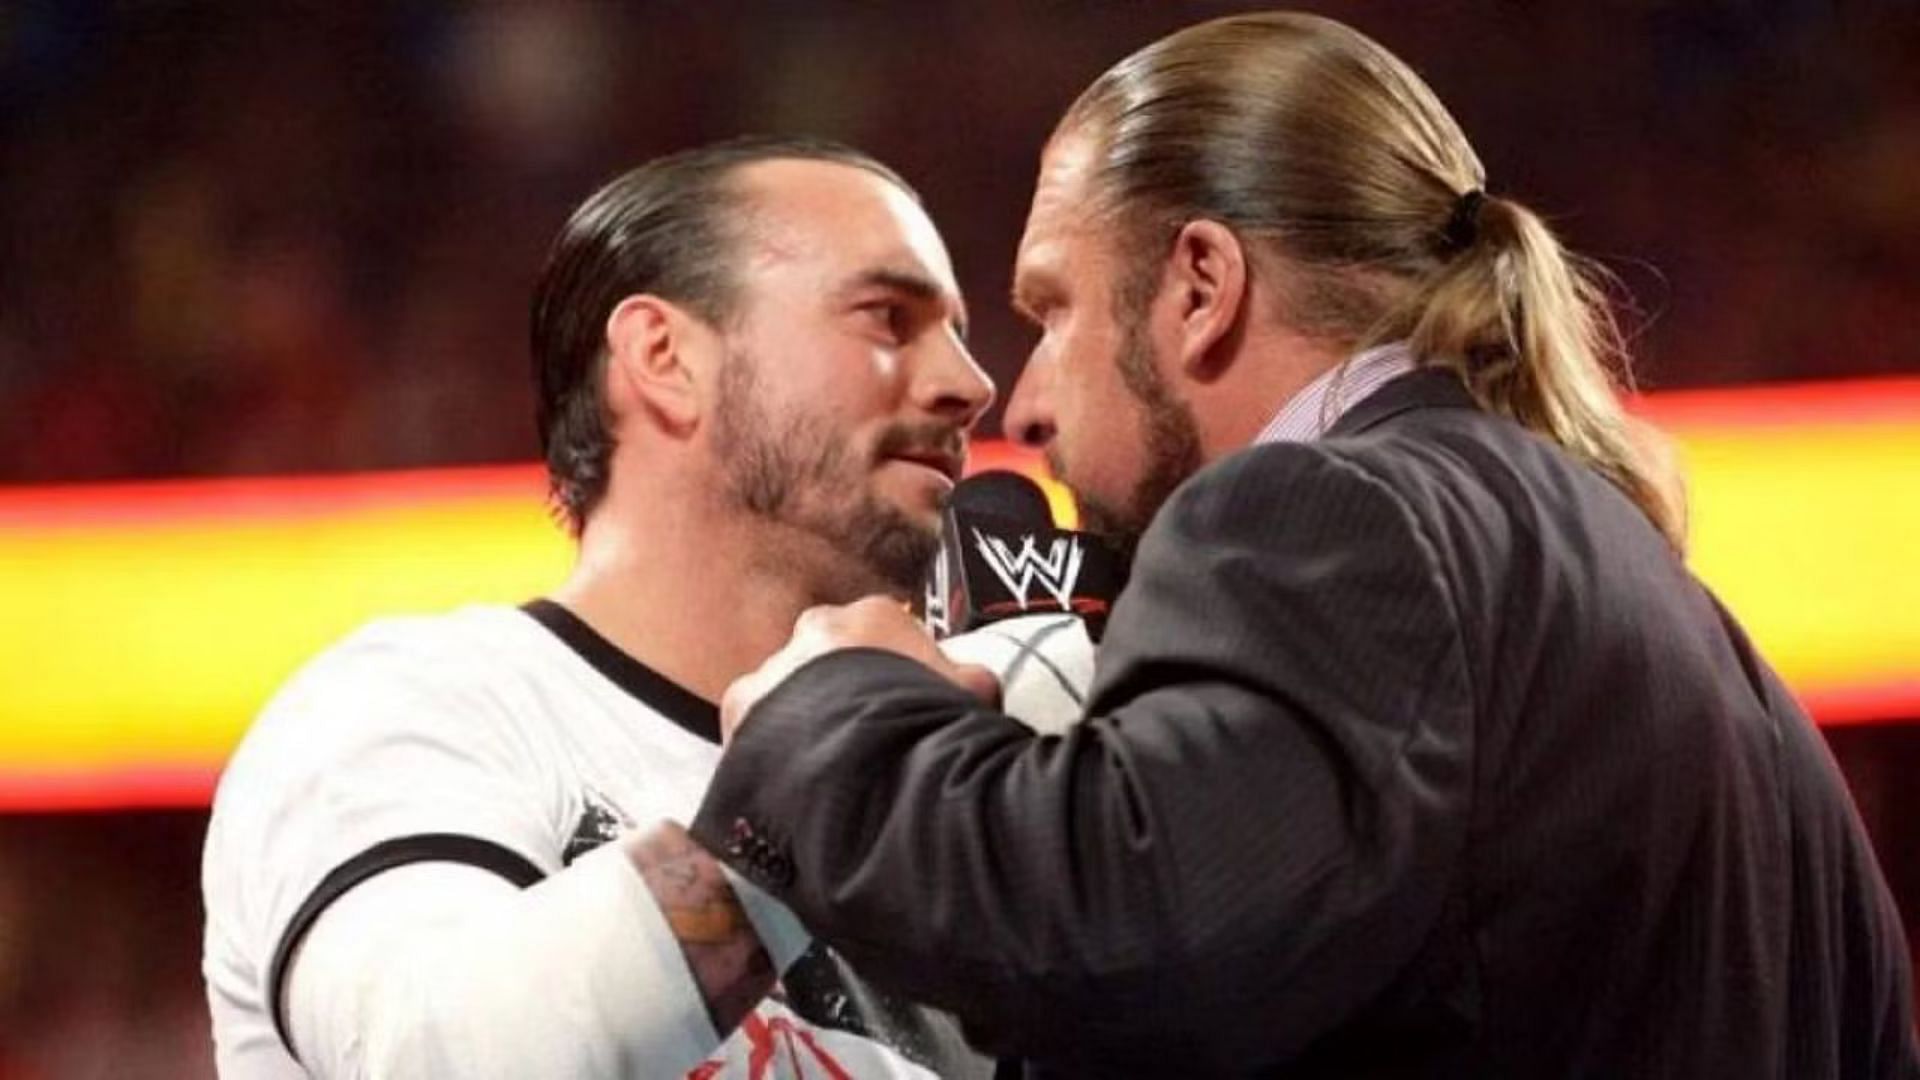 Triple H and CM Punk both worked with each other in WWE